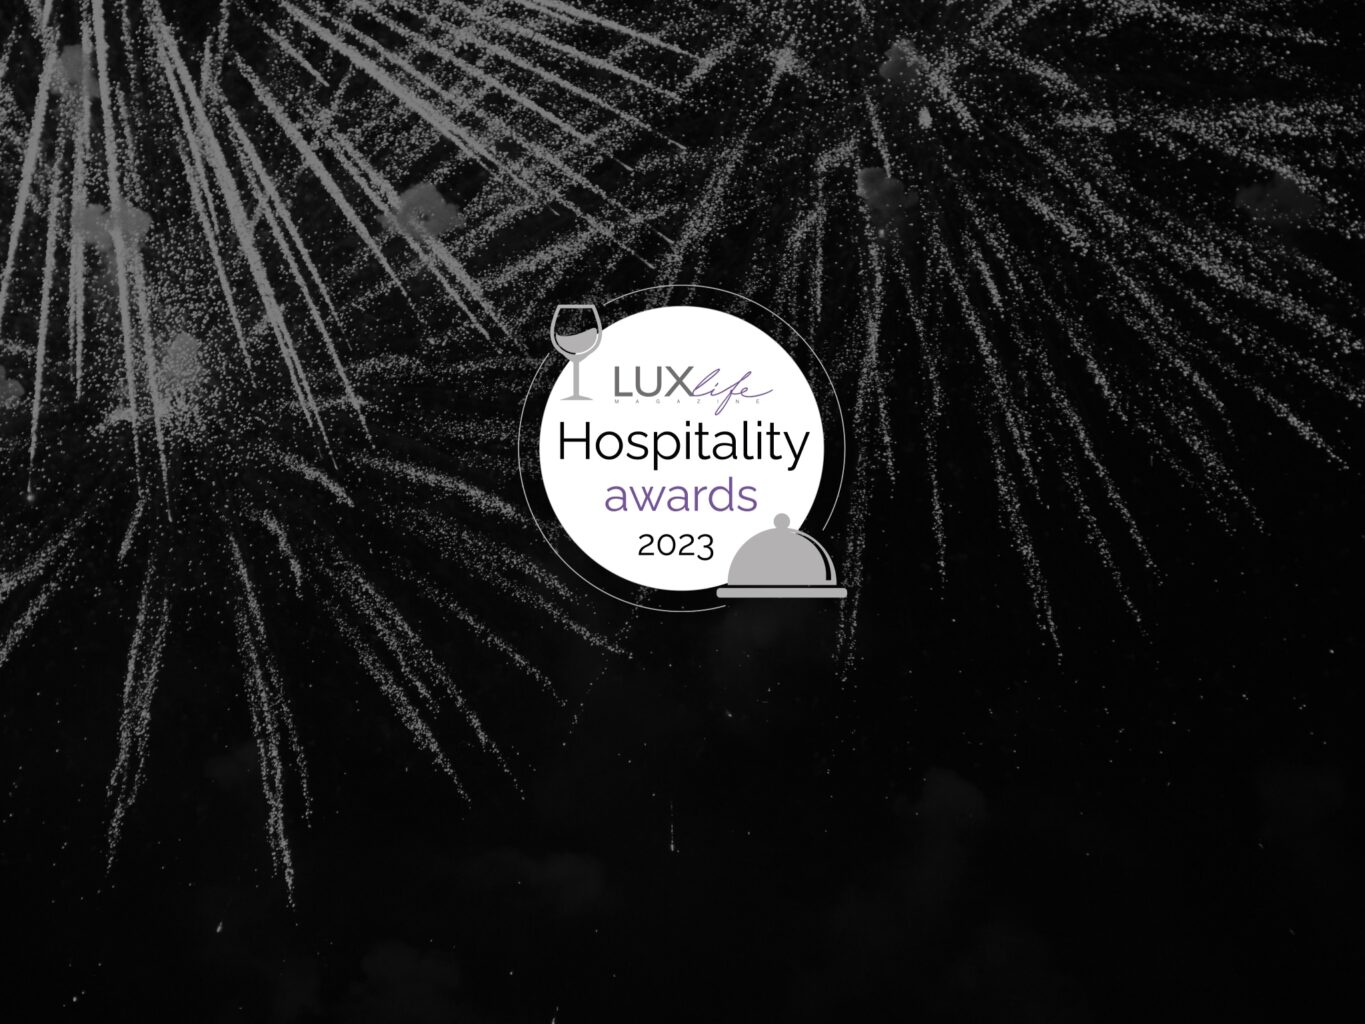 INTELITY Named Best Guest Experience & Staff Management Platform in the U.S. from LUXlife Hospitality Awards 2023